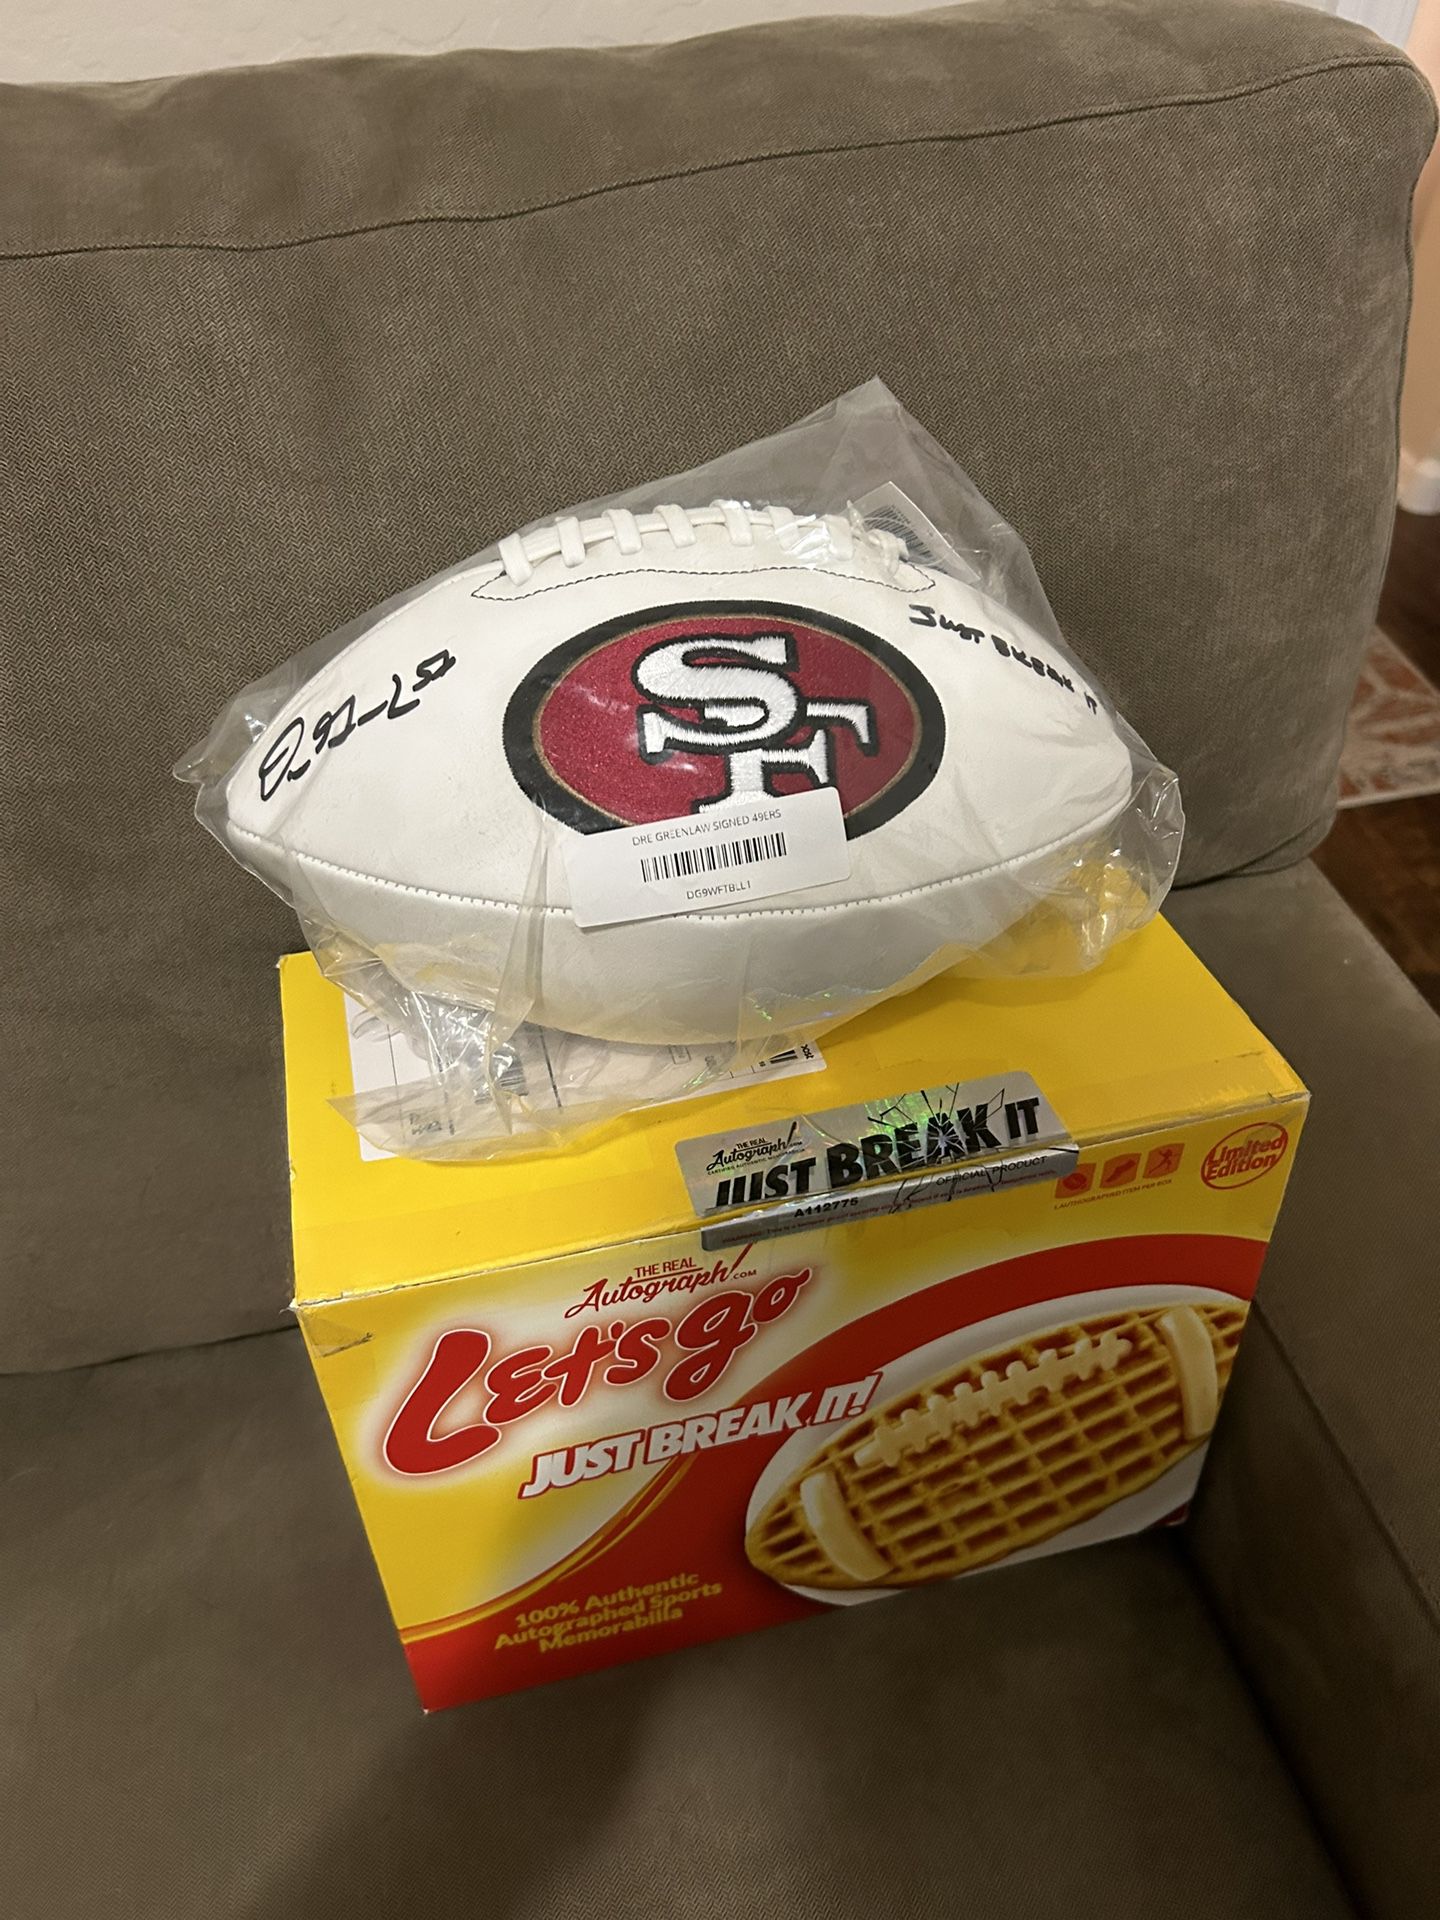 Signed/Authenticated Dre Greenlaw 49ers Football!